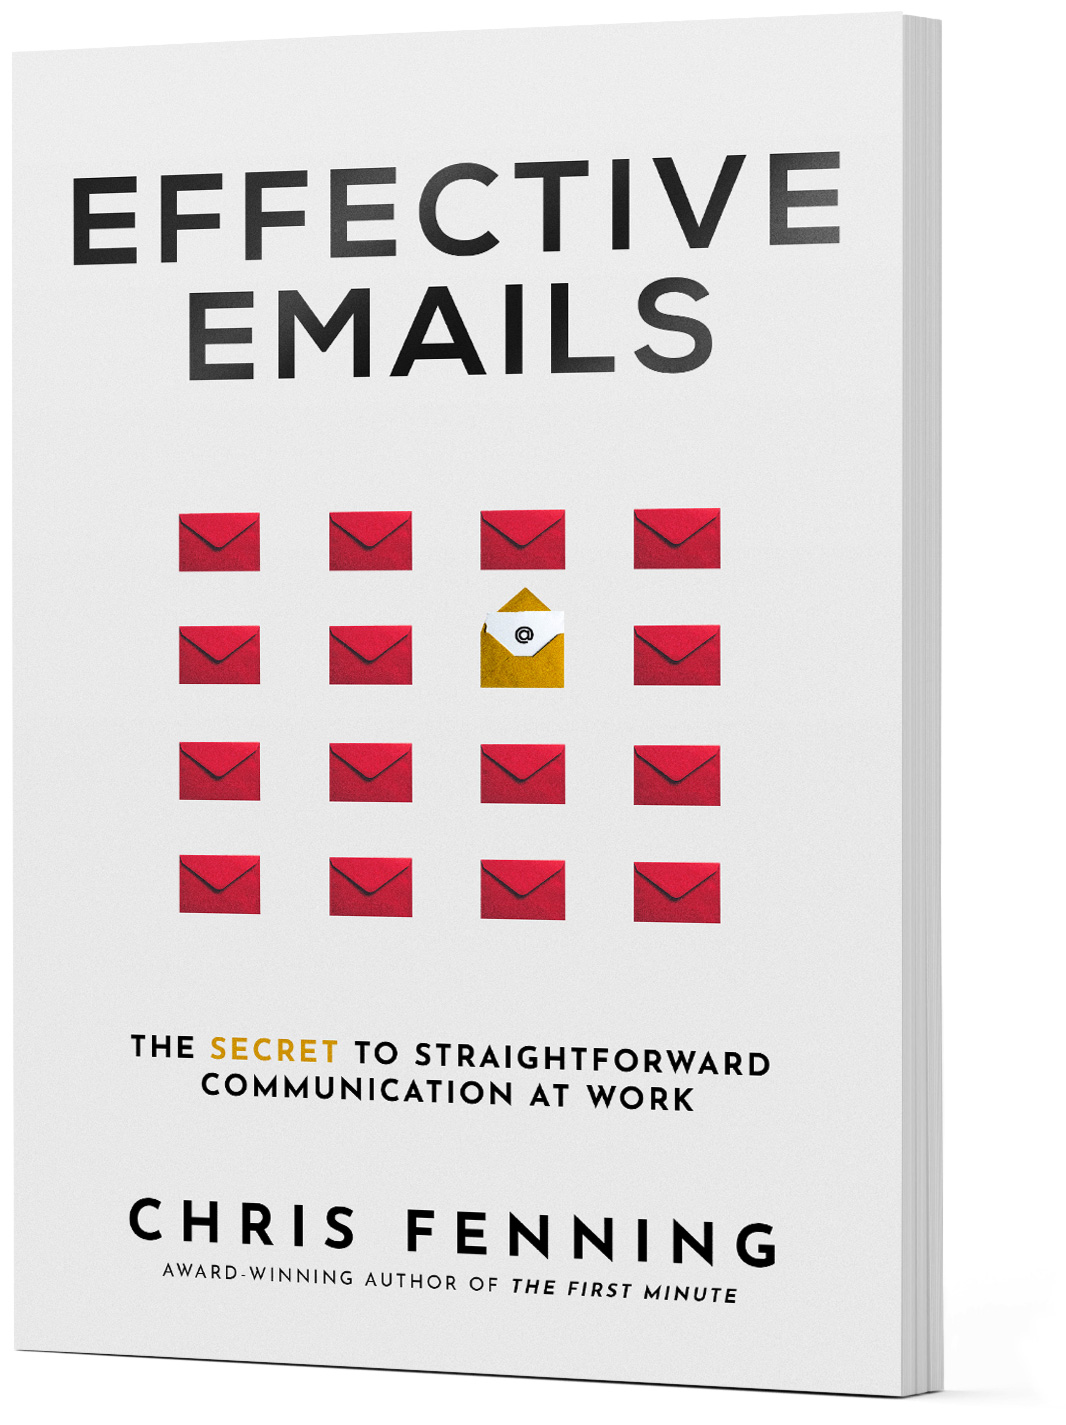 Effective Emails book by Chris Fenning